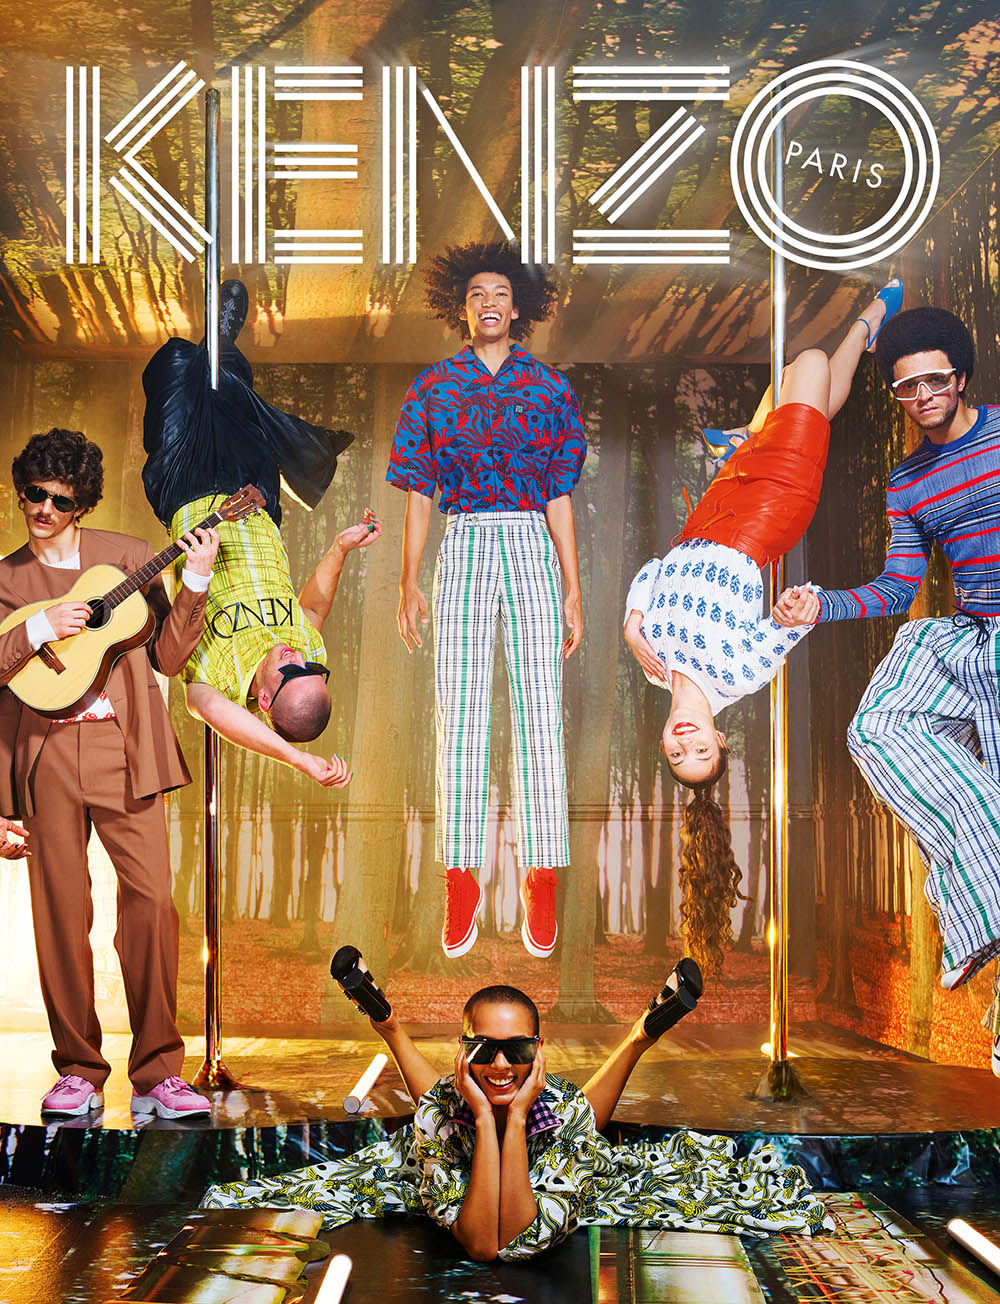 Kenzo Spring Summer 2019 Campaign